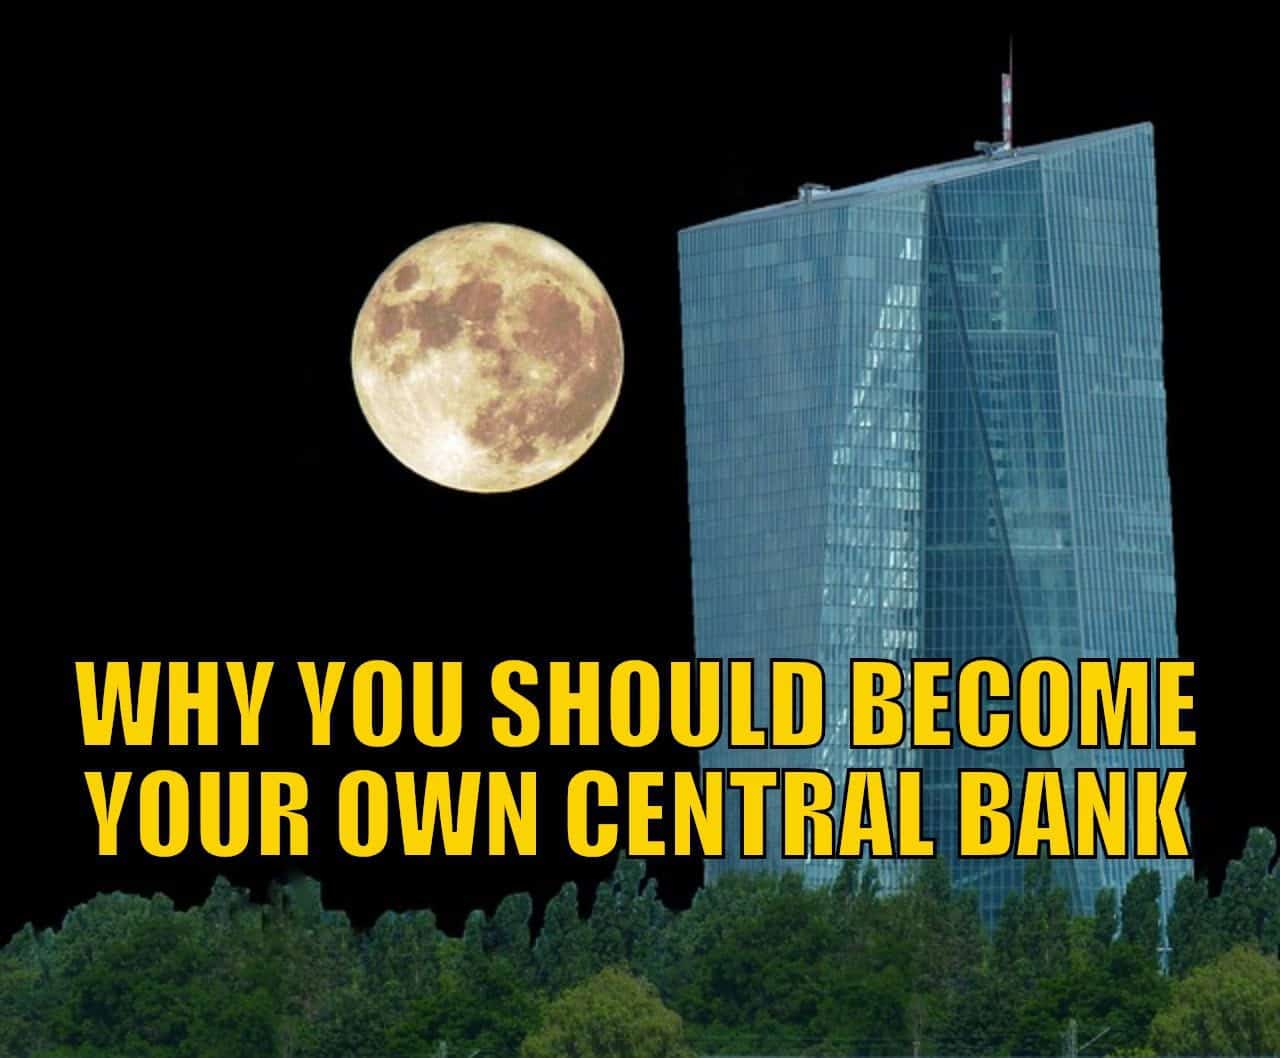 Why You Should Become Your Own Central Bank – Even if Your Nation’s Central Bank Has Gold Reserves